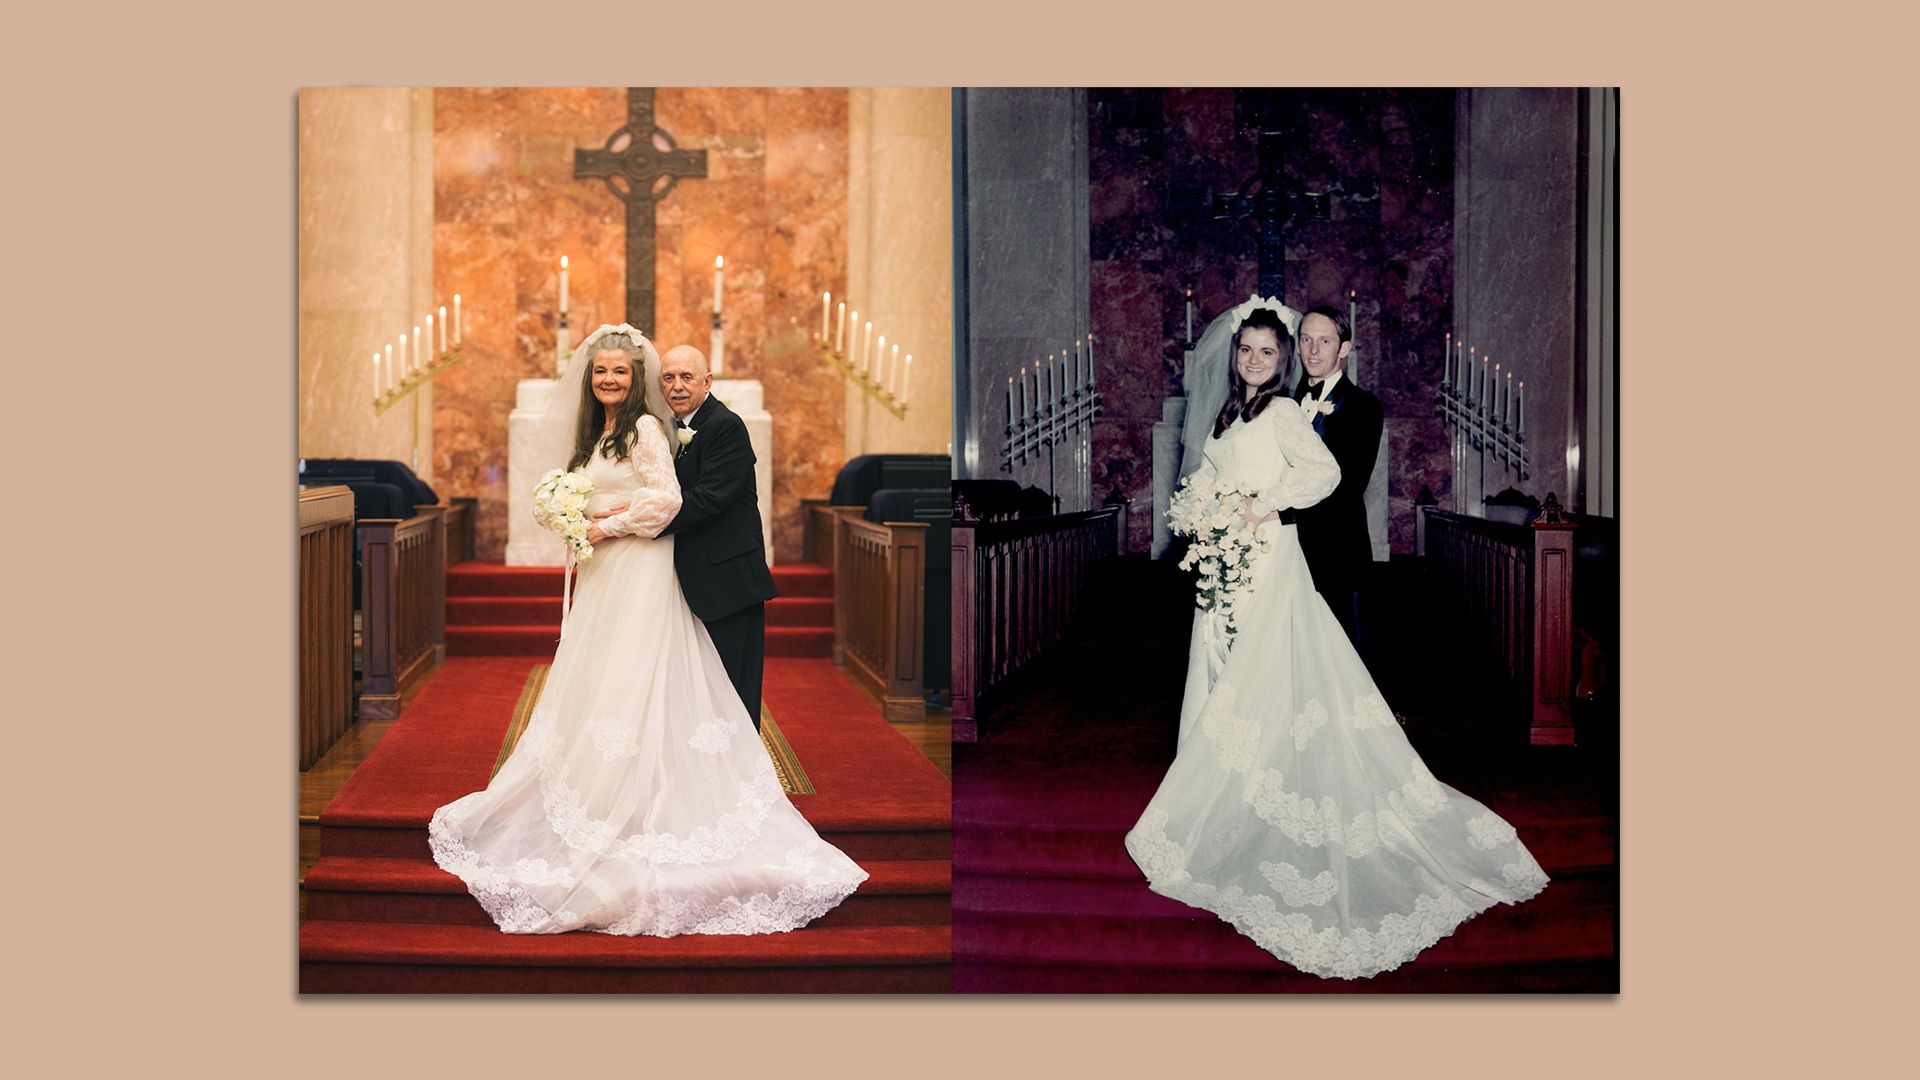 A local couple recreated their wedding photos 50 years later.